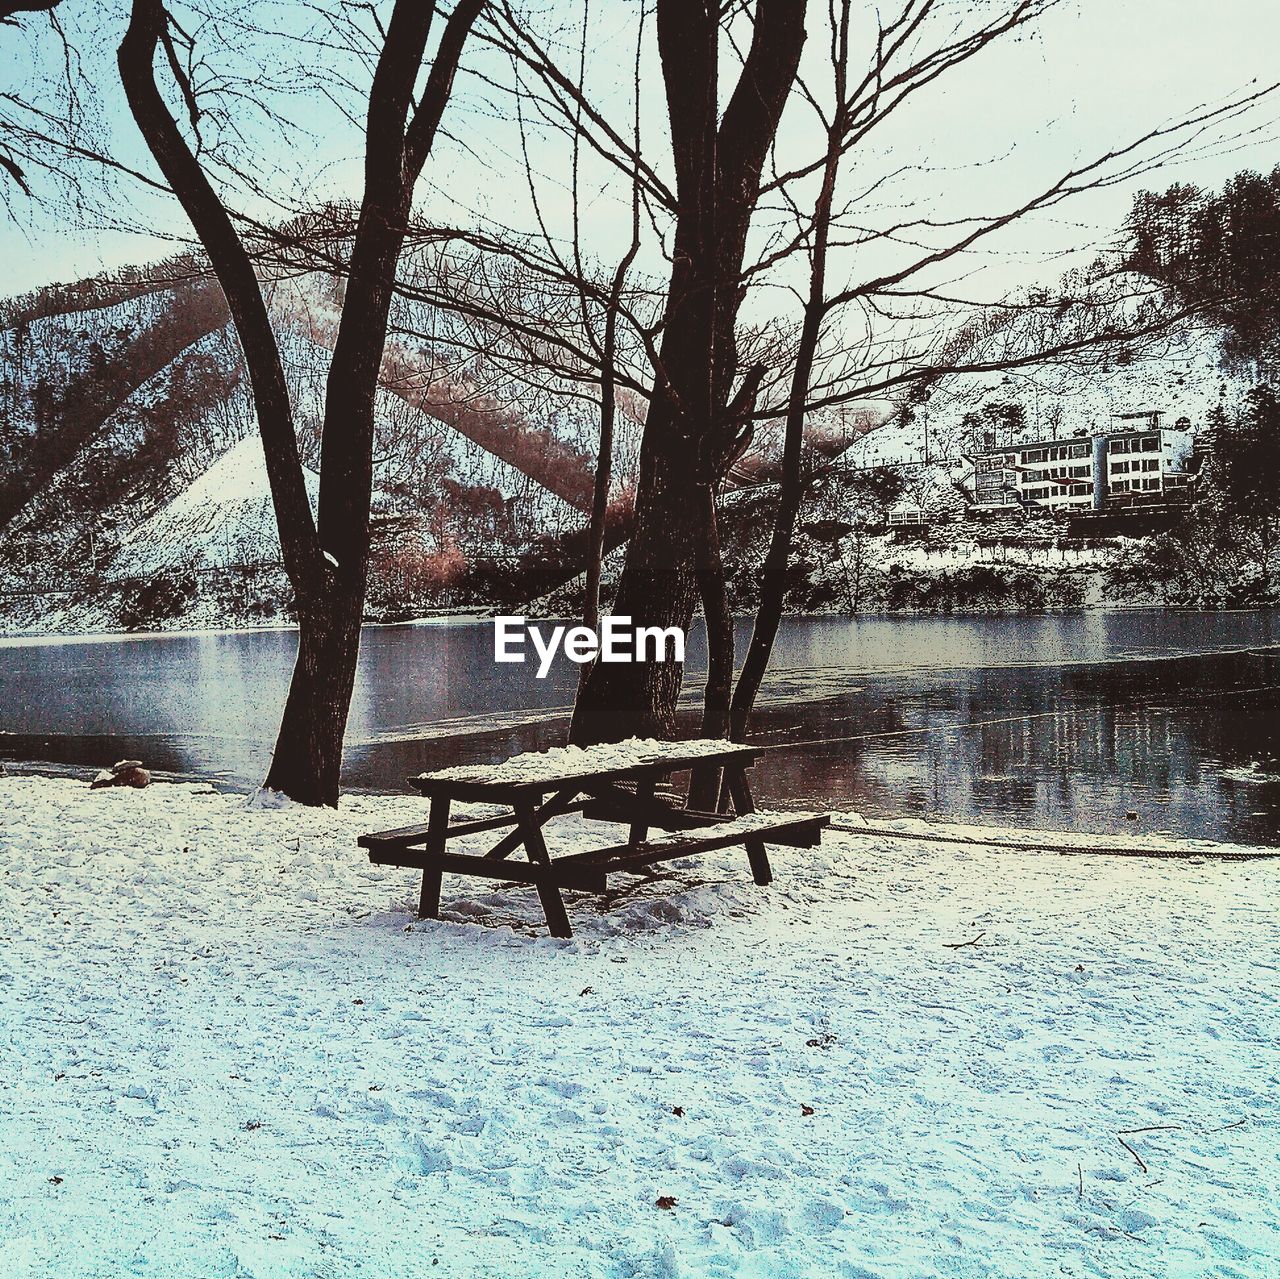 Snow covered bench on field by lake against mountains